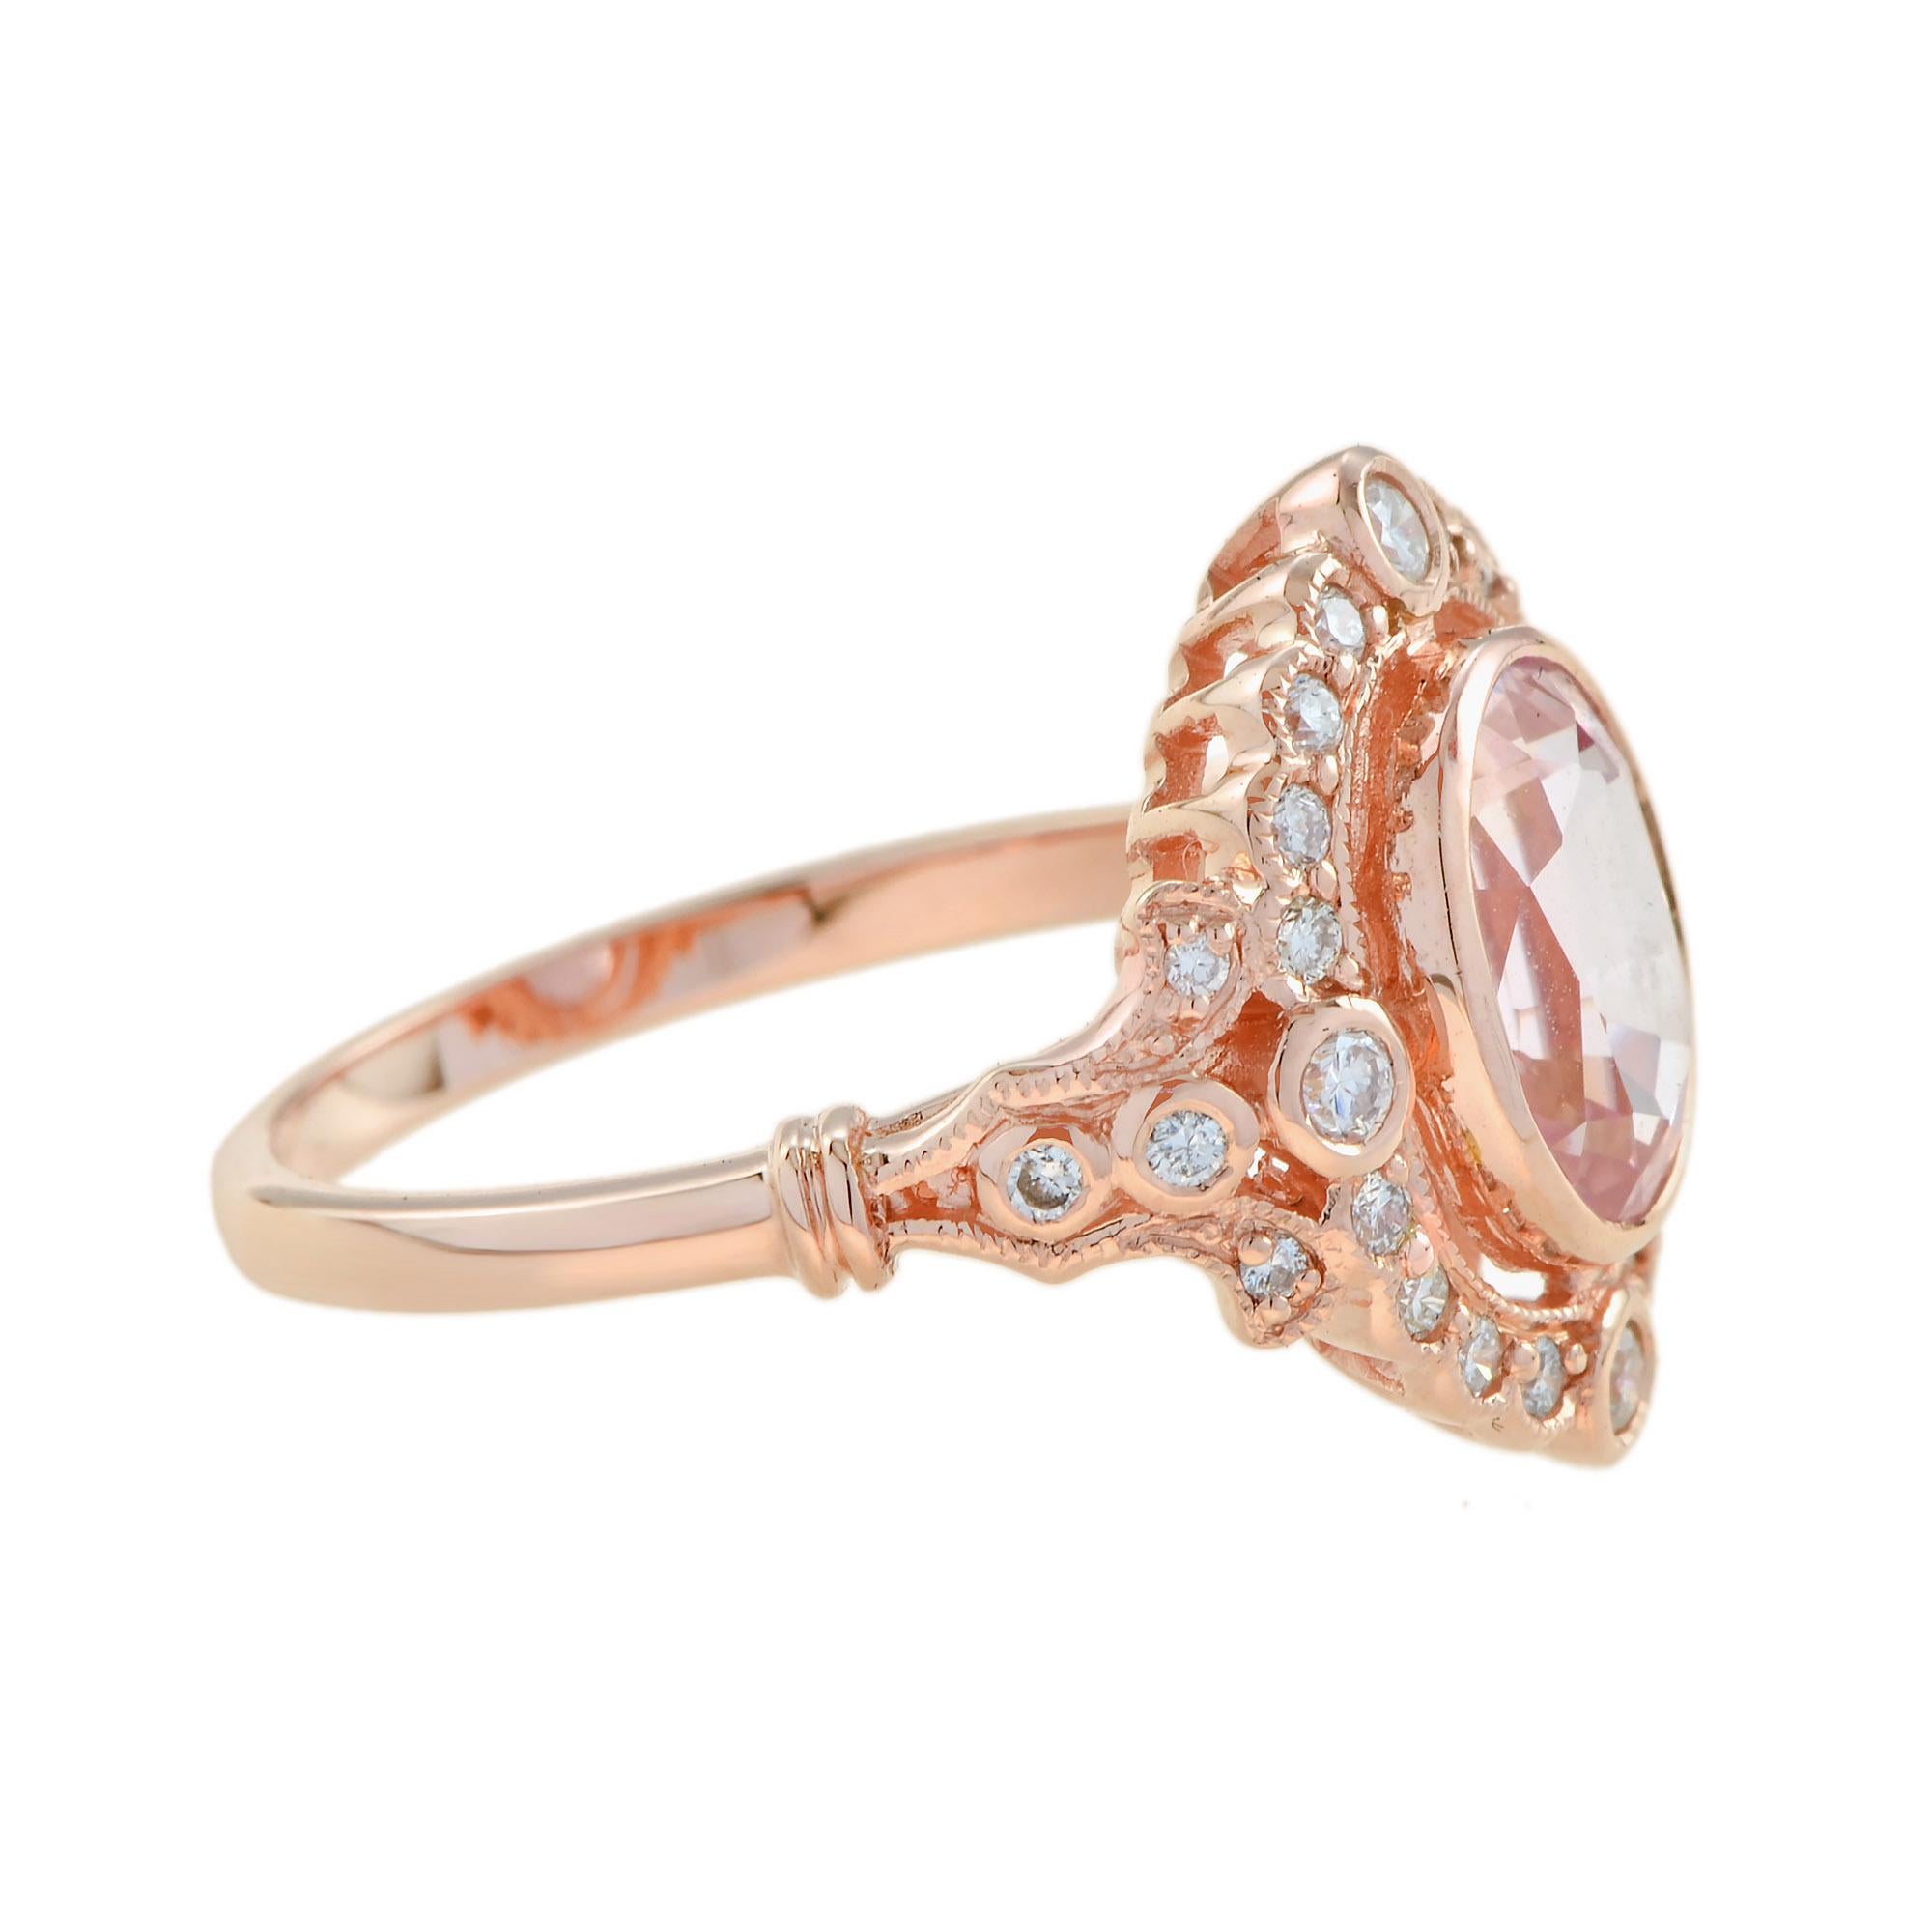 For Sale:  2.50 Ct. Morganite Diamond Vintage Style Halo Engagement Ring in 18K Rose Gold 4